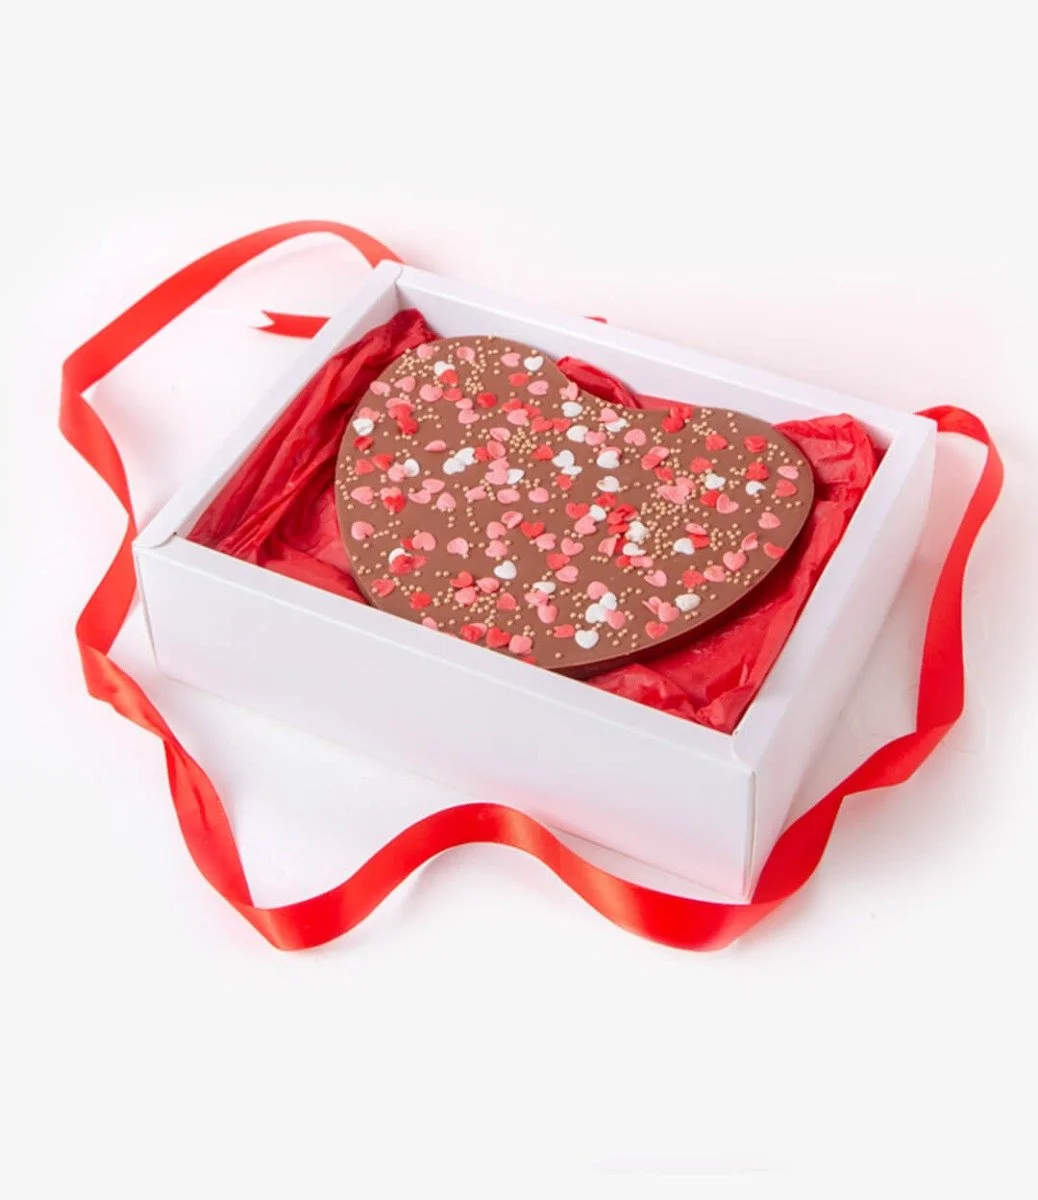 Valentines Chocolate Bar by NJD